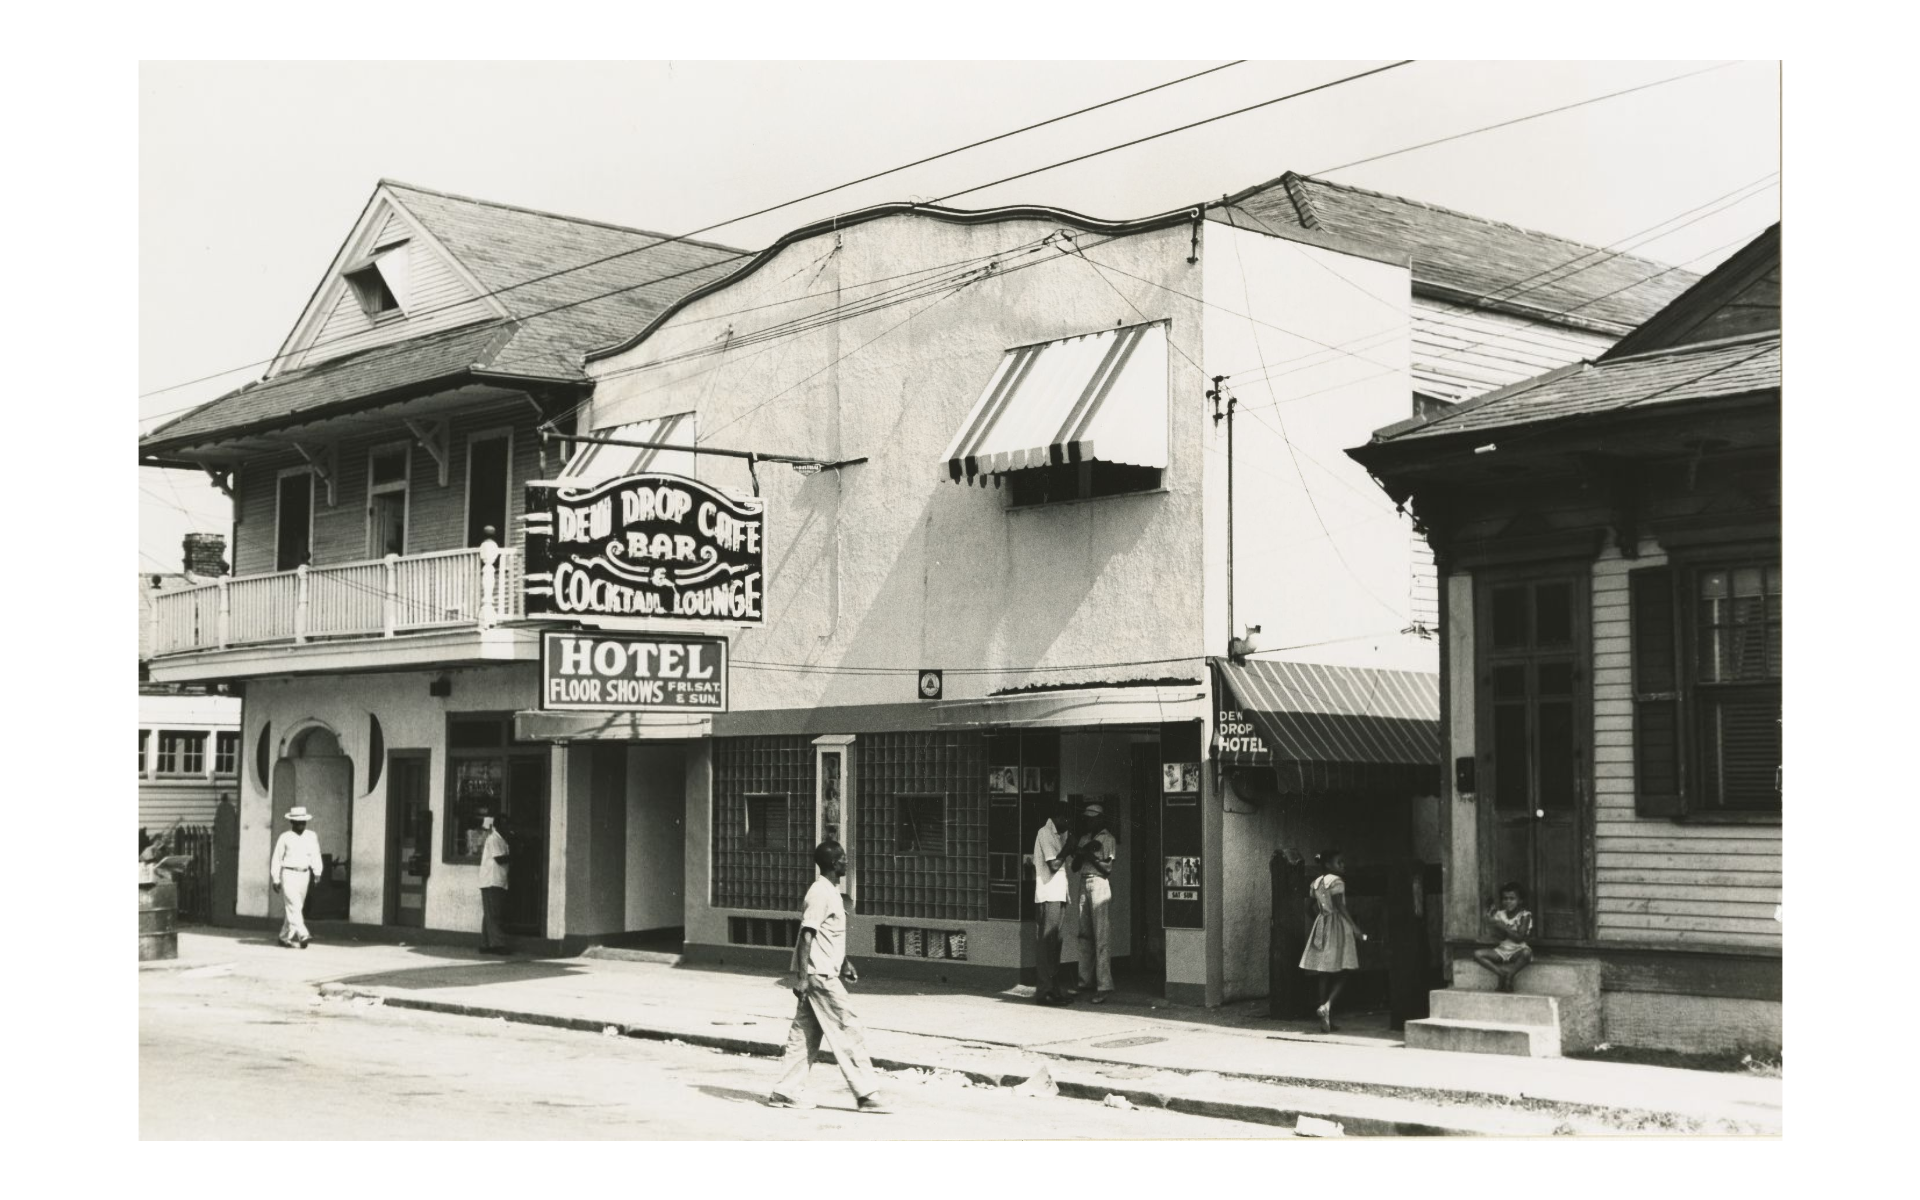 Dew Drop Inn, 1953, from Ralston Crawford collection of New Orleans jazz photographs, Tulane University Special Collections